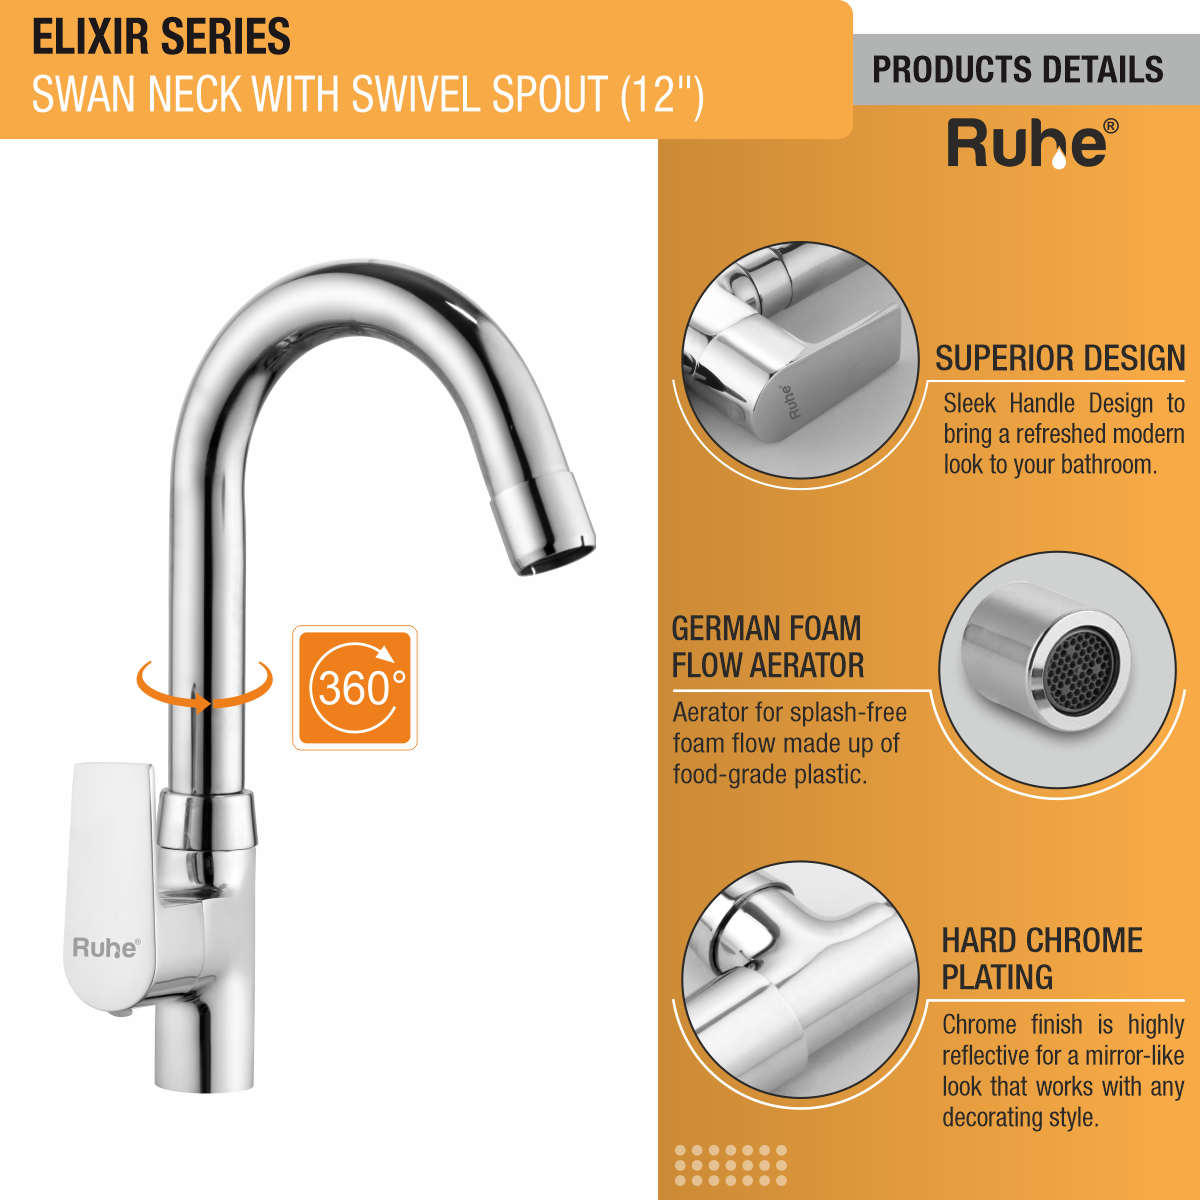 Elixir Swan Neck with Small (12 inches) Round Swivel Spout Faucet product details